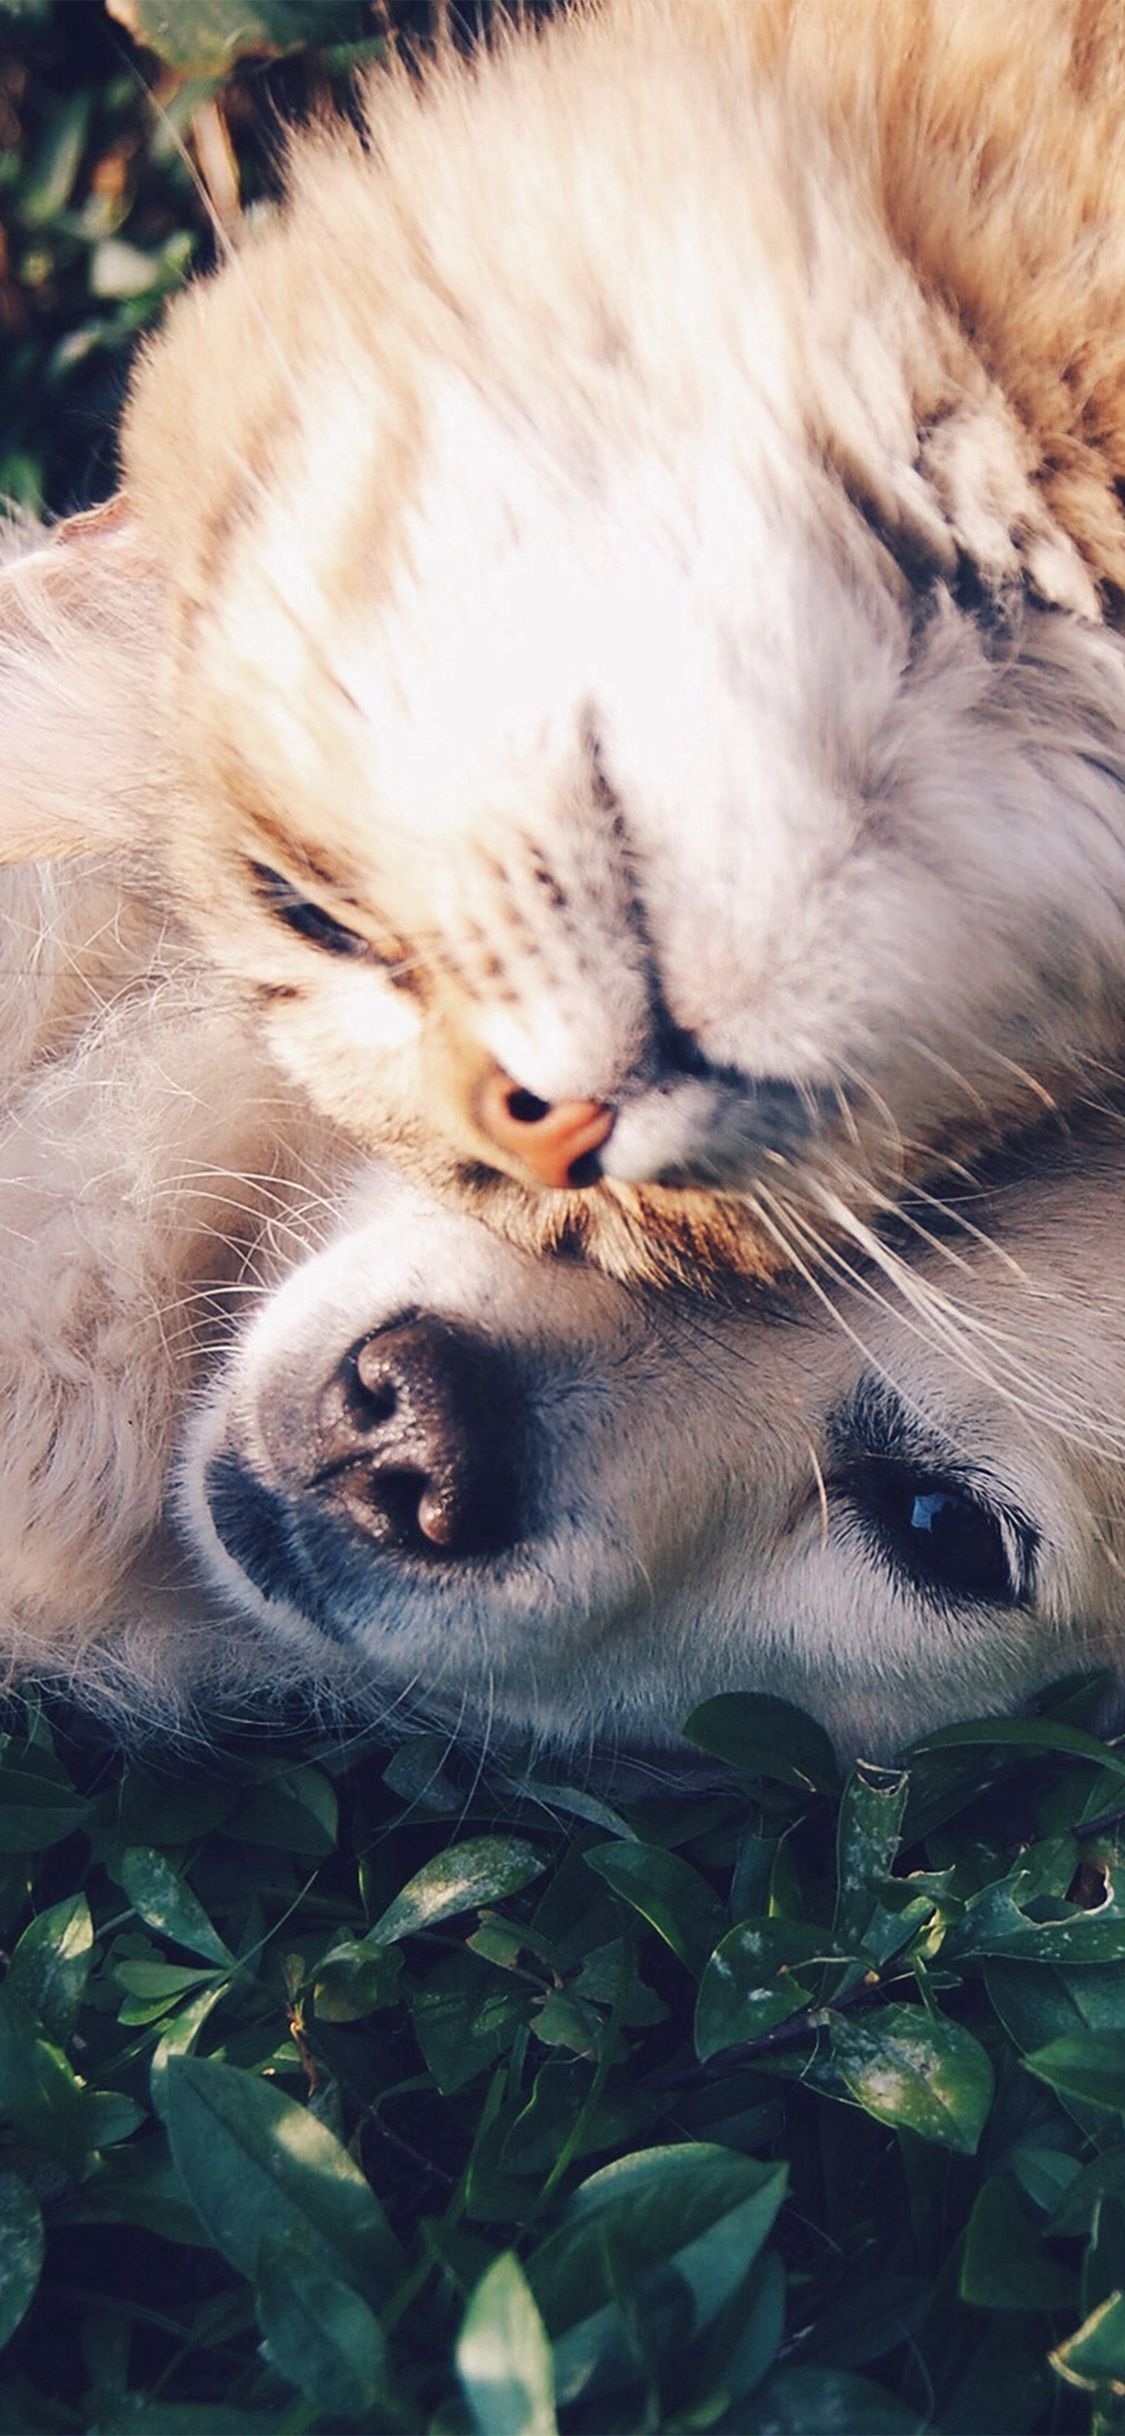 Cat And Dog Animal Love Nature Pure #iPhone #X #wallpaper. Cat training, Cats, Dog cat